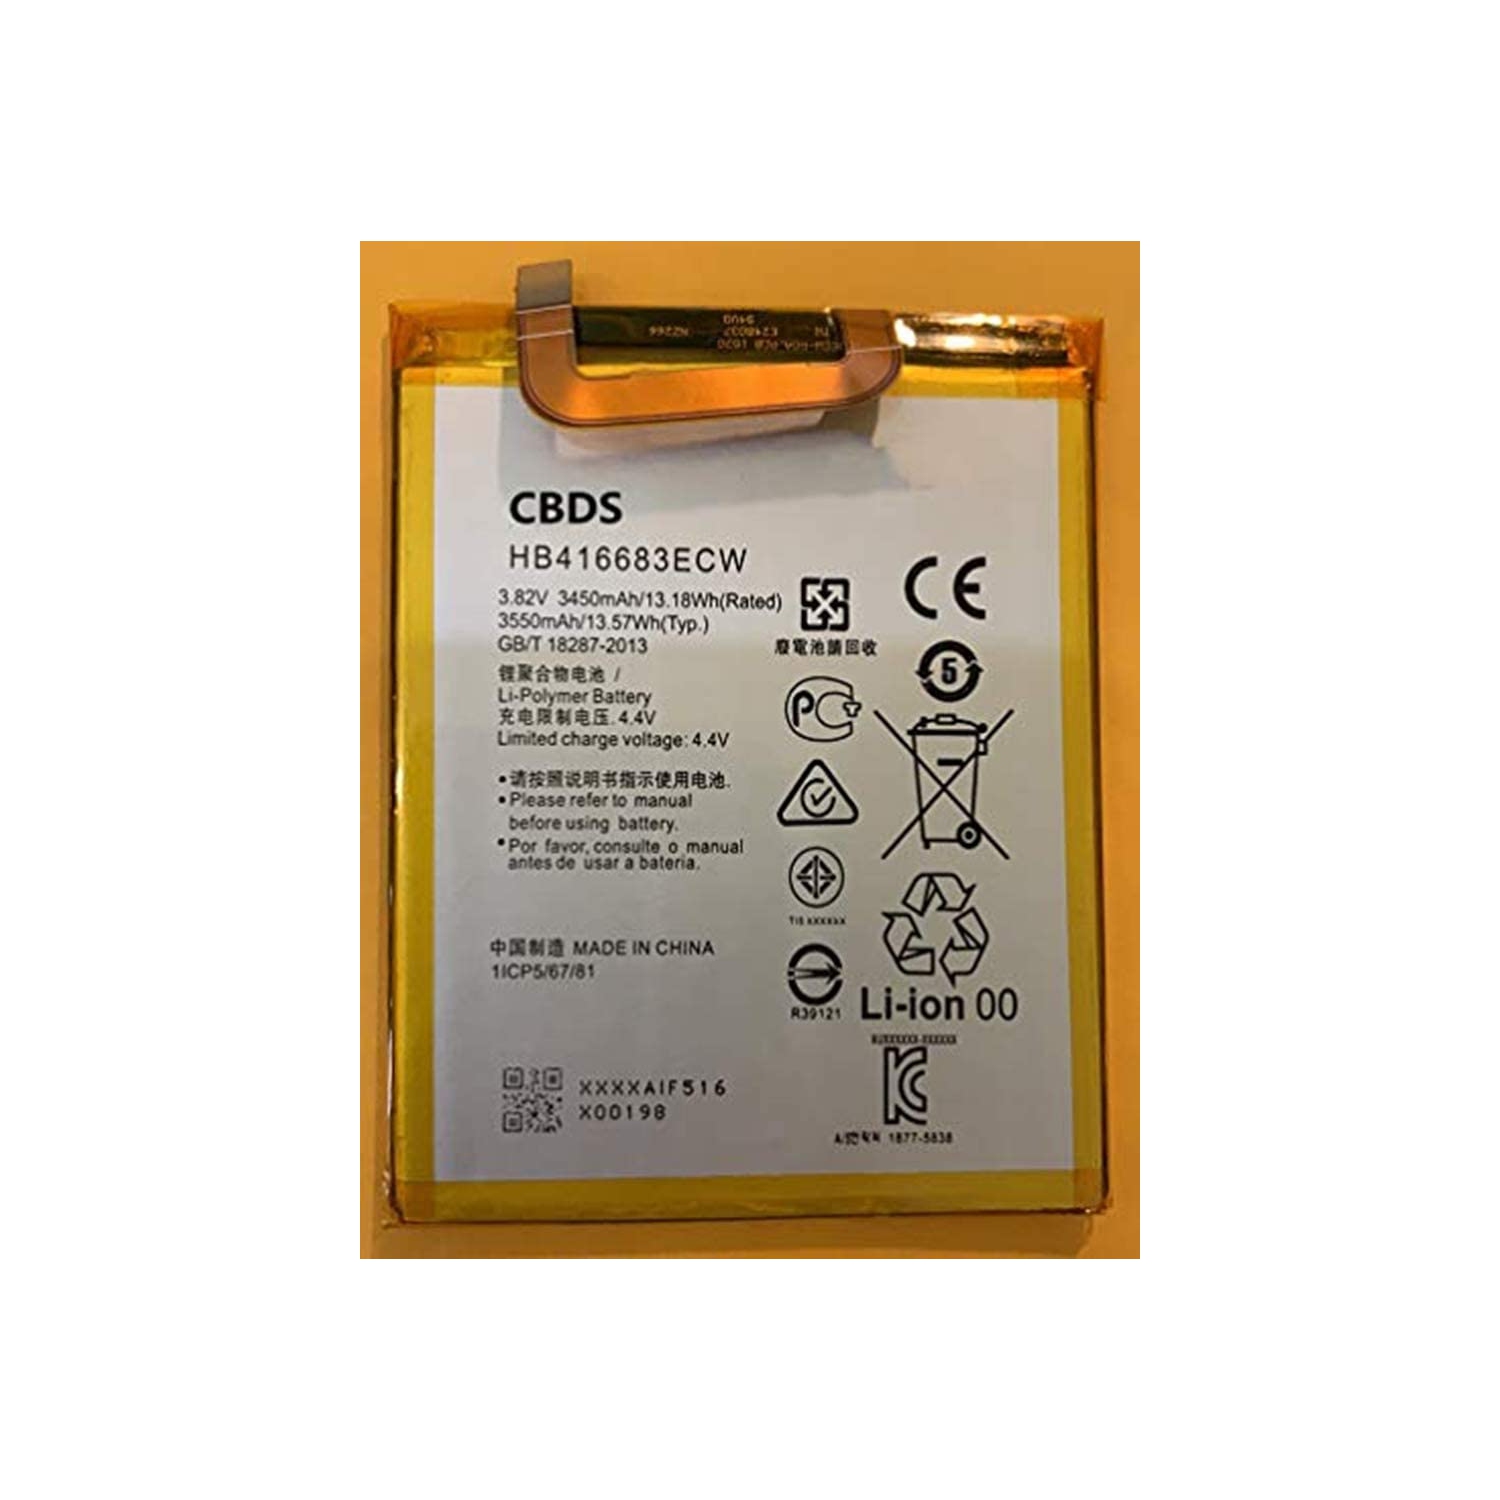 (CBDS) 3450mAh, 13.18 Wh Replacement Battery - Compatible with Huawei Google Nexus 6P HB416683ECW in Non-Retail